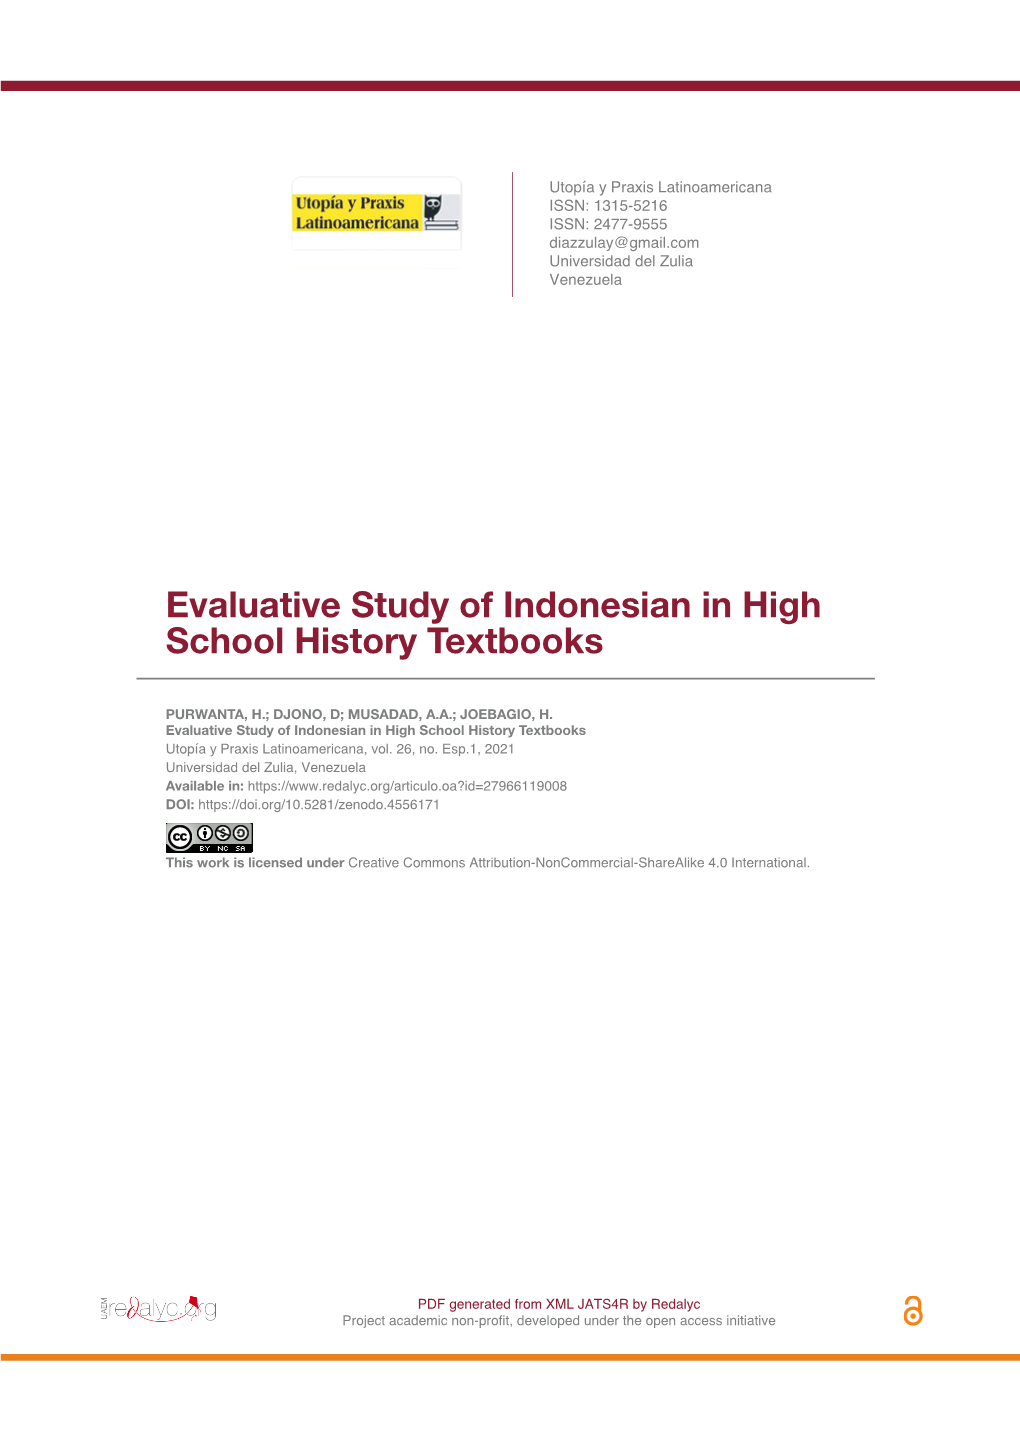 Evaluative Study of Indonesian in High School History Textbooks